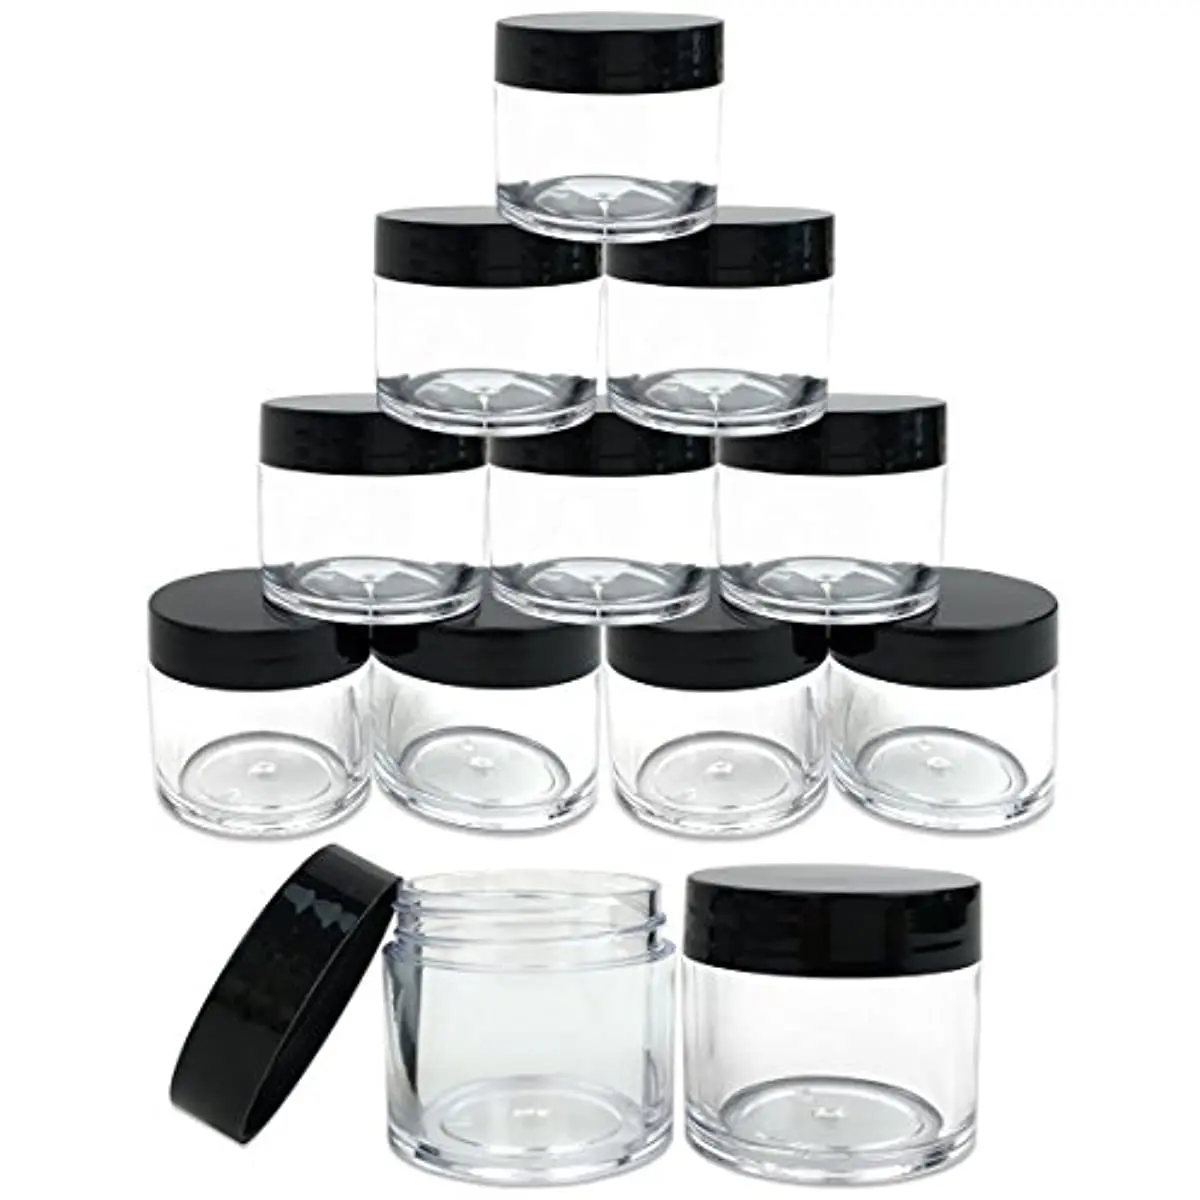 

12 Piece 1 Oz Round Clear Jars with Flat Top Lids Creams Lotions Make Up Cosmetics Samples Herbs Ointments Portable Containers